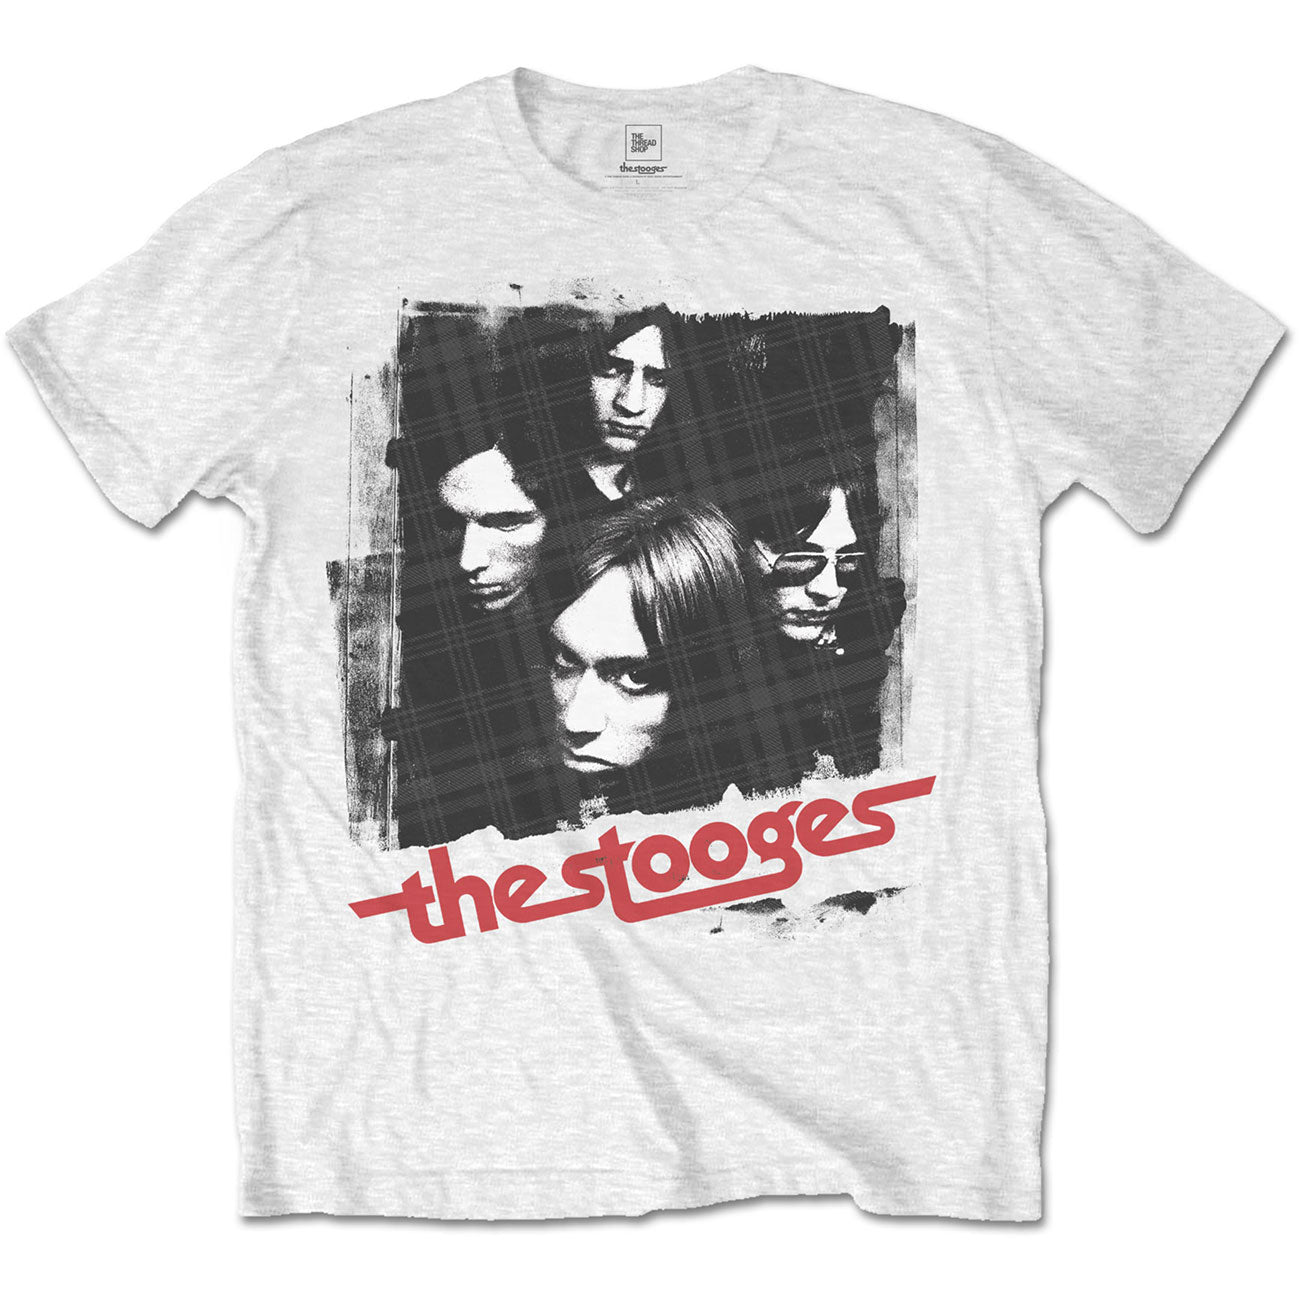 Iggy & The Stooges Unisex T-Shirt: Four Faces